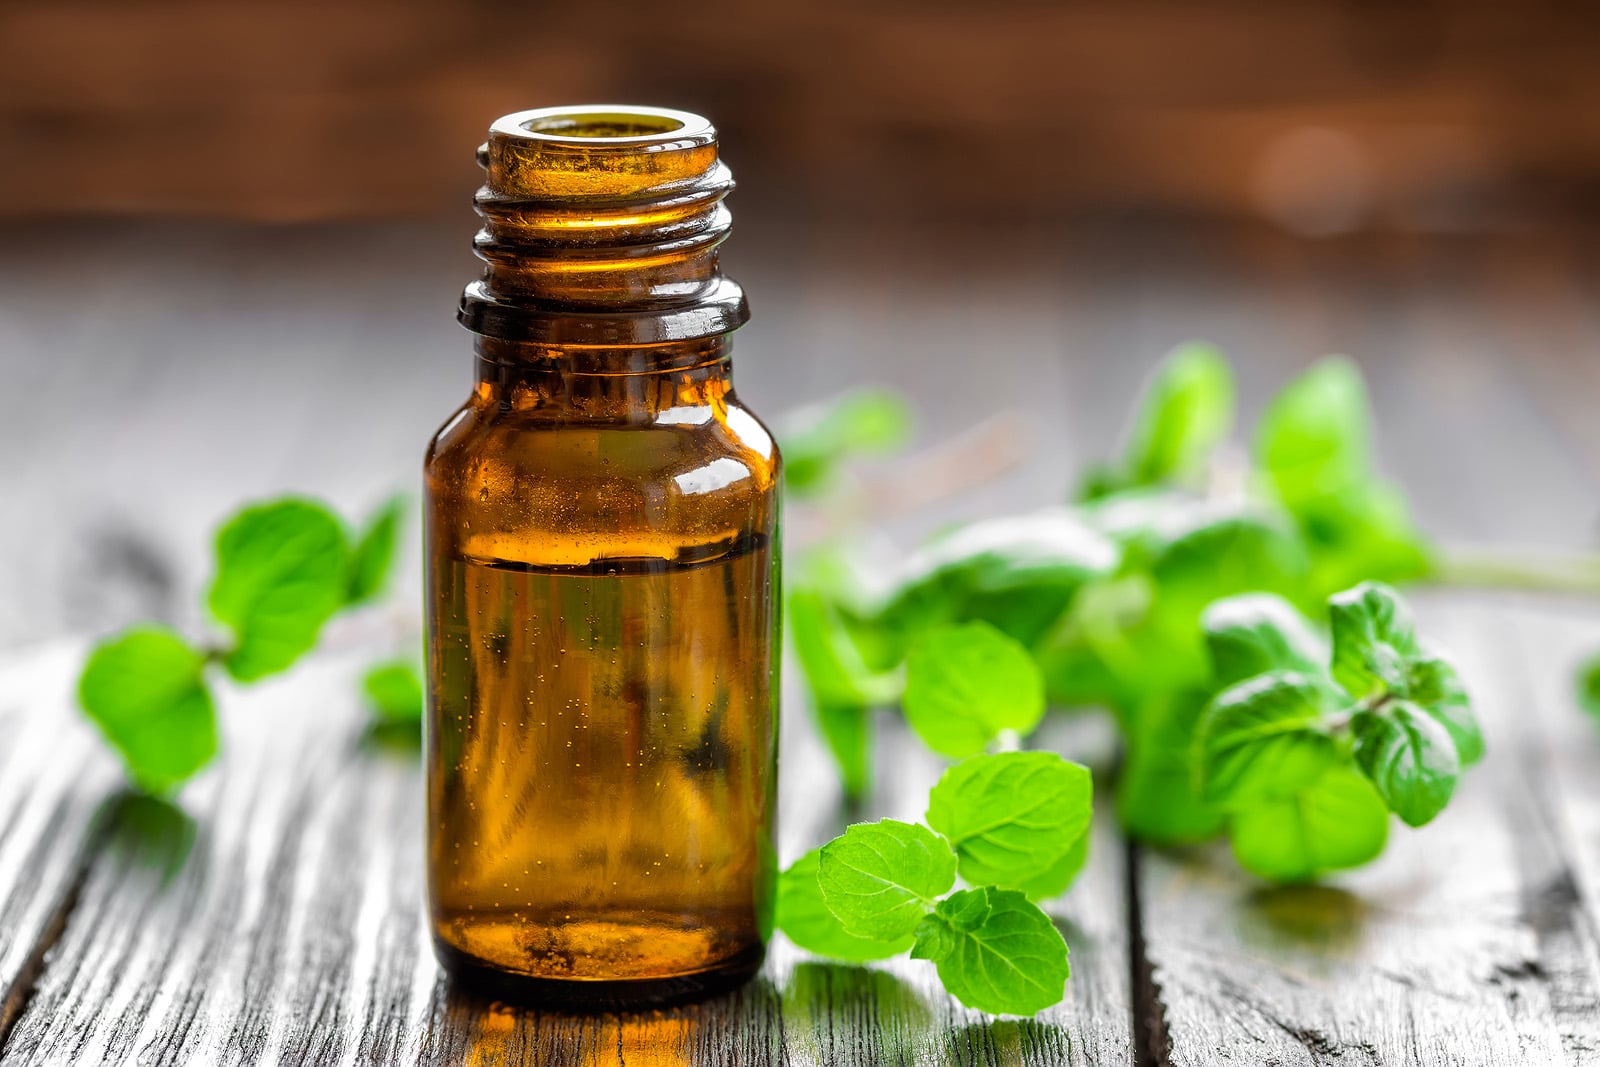 Mint oil in a bottle and fresh leaves